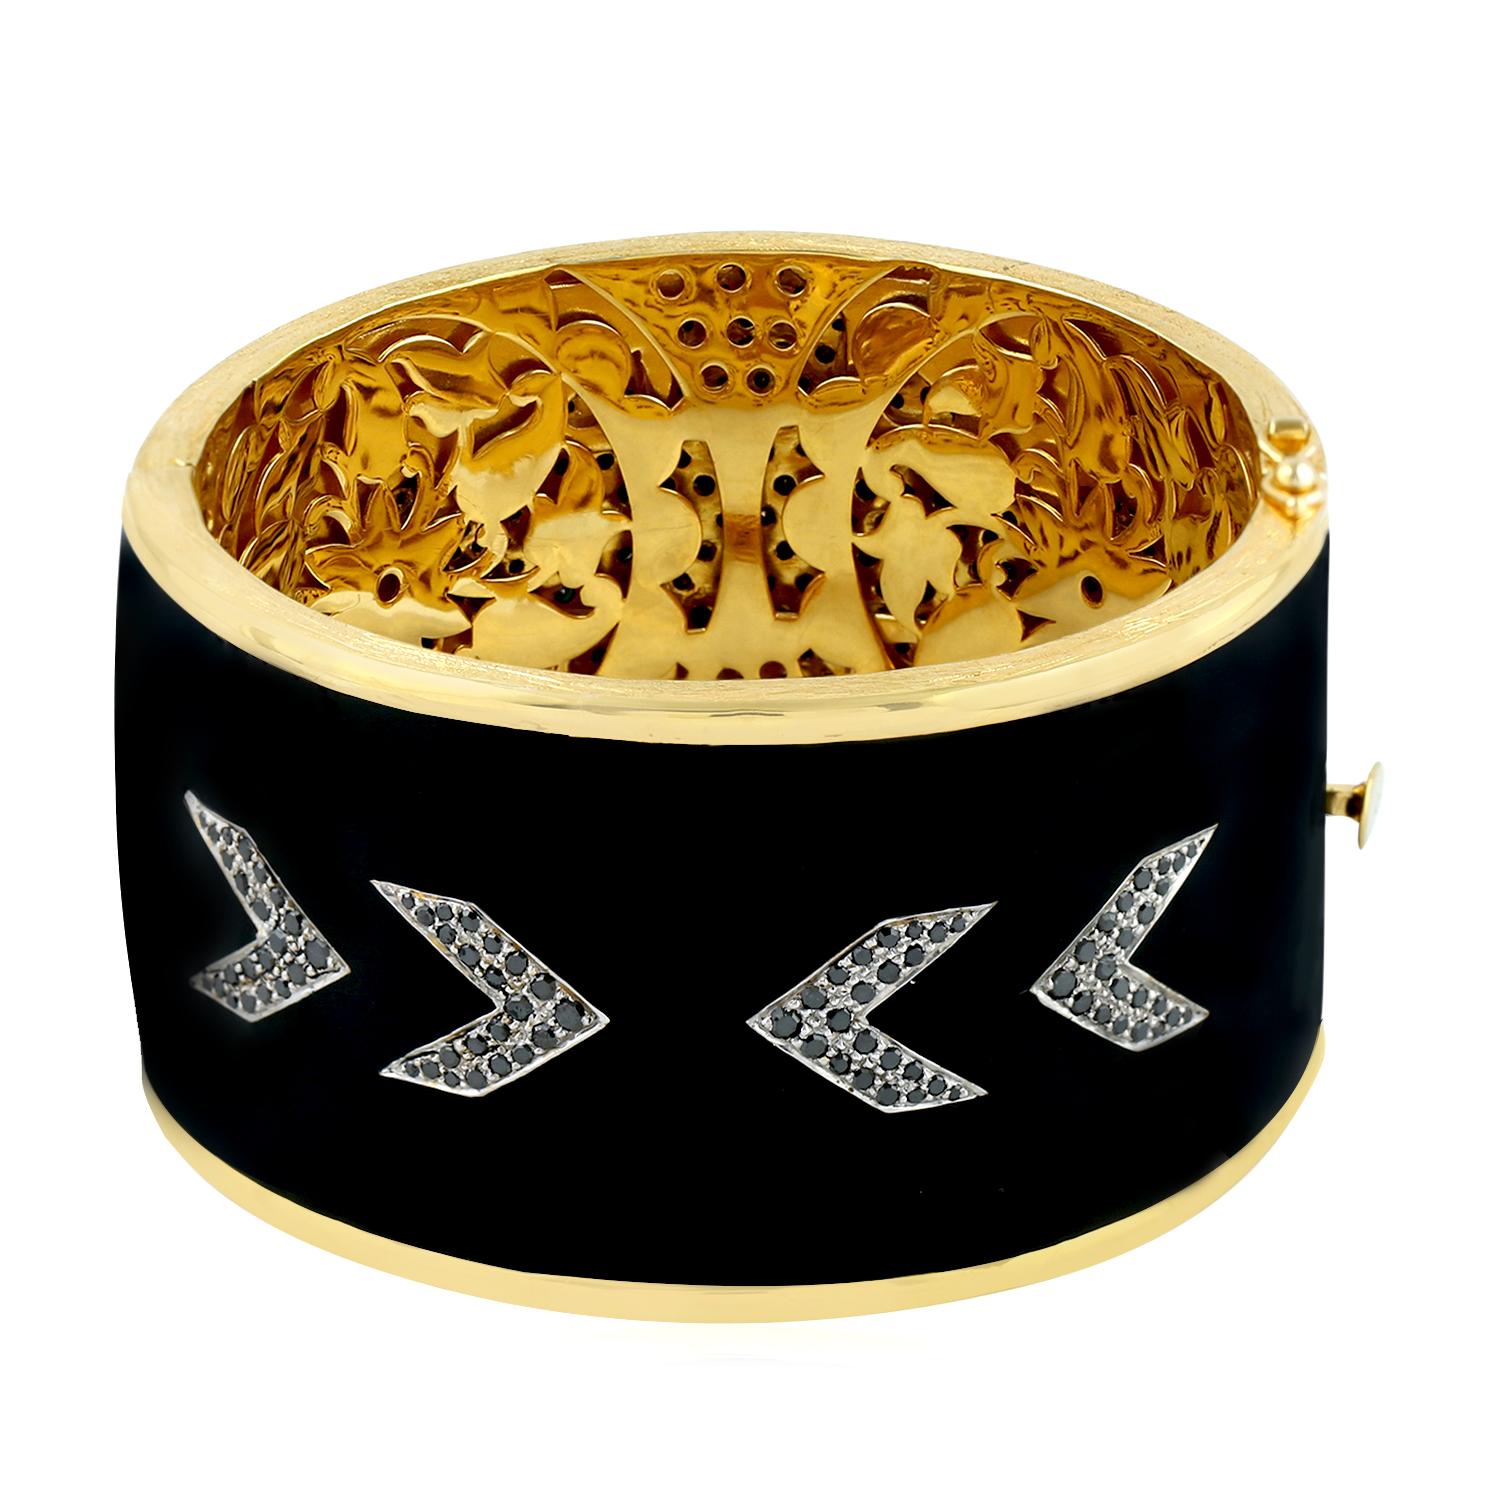 Art Nouveau Maltese Cross Made By Black Diamond On Black enamel Cuff Made In 18k Yellow Gold For Sale